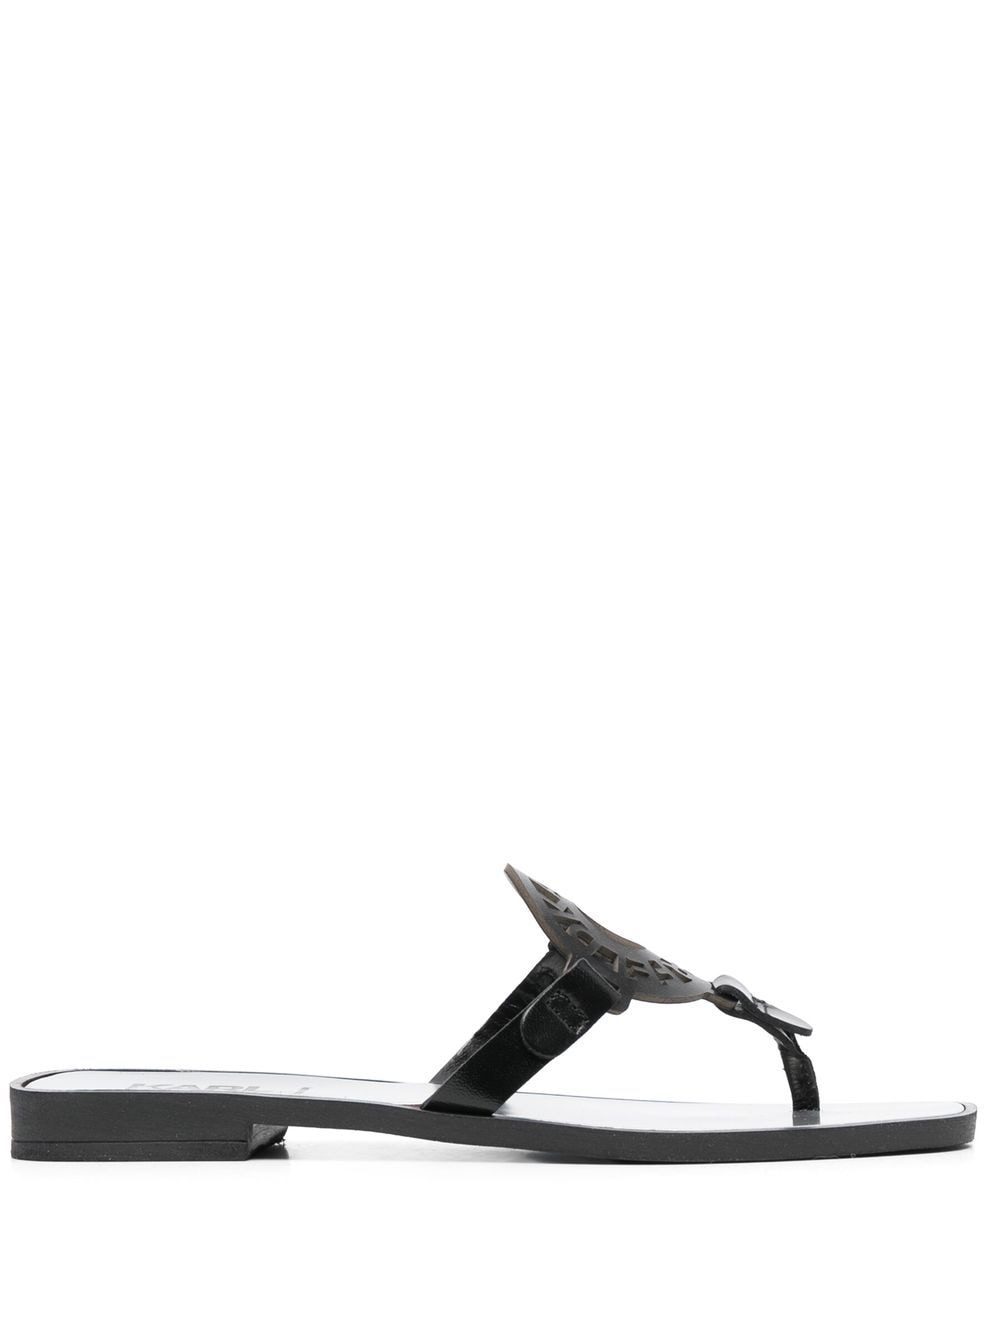 KARL LAGERFELD LOGO-PATCH THONG SANDALS